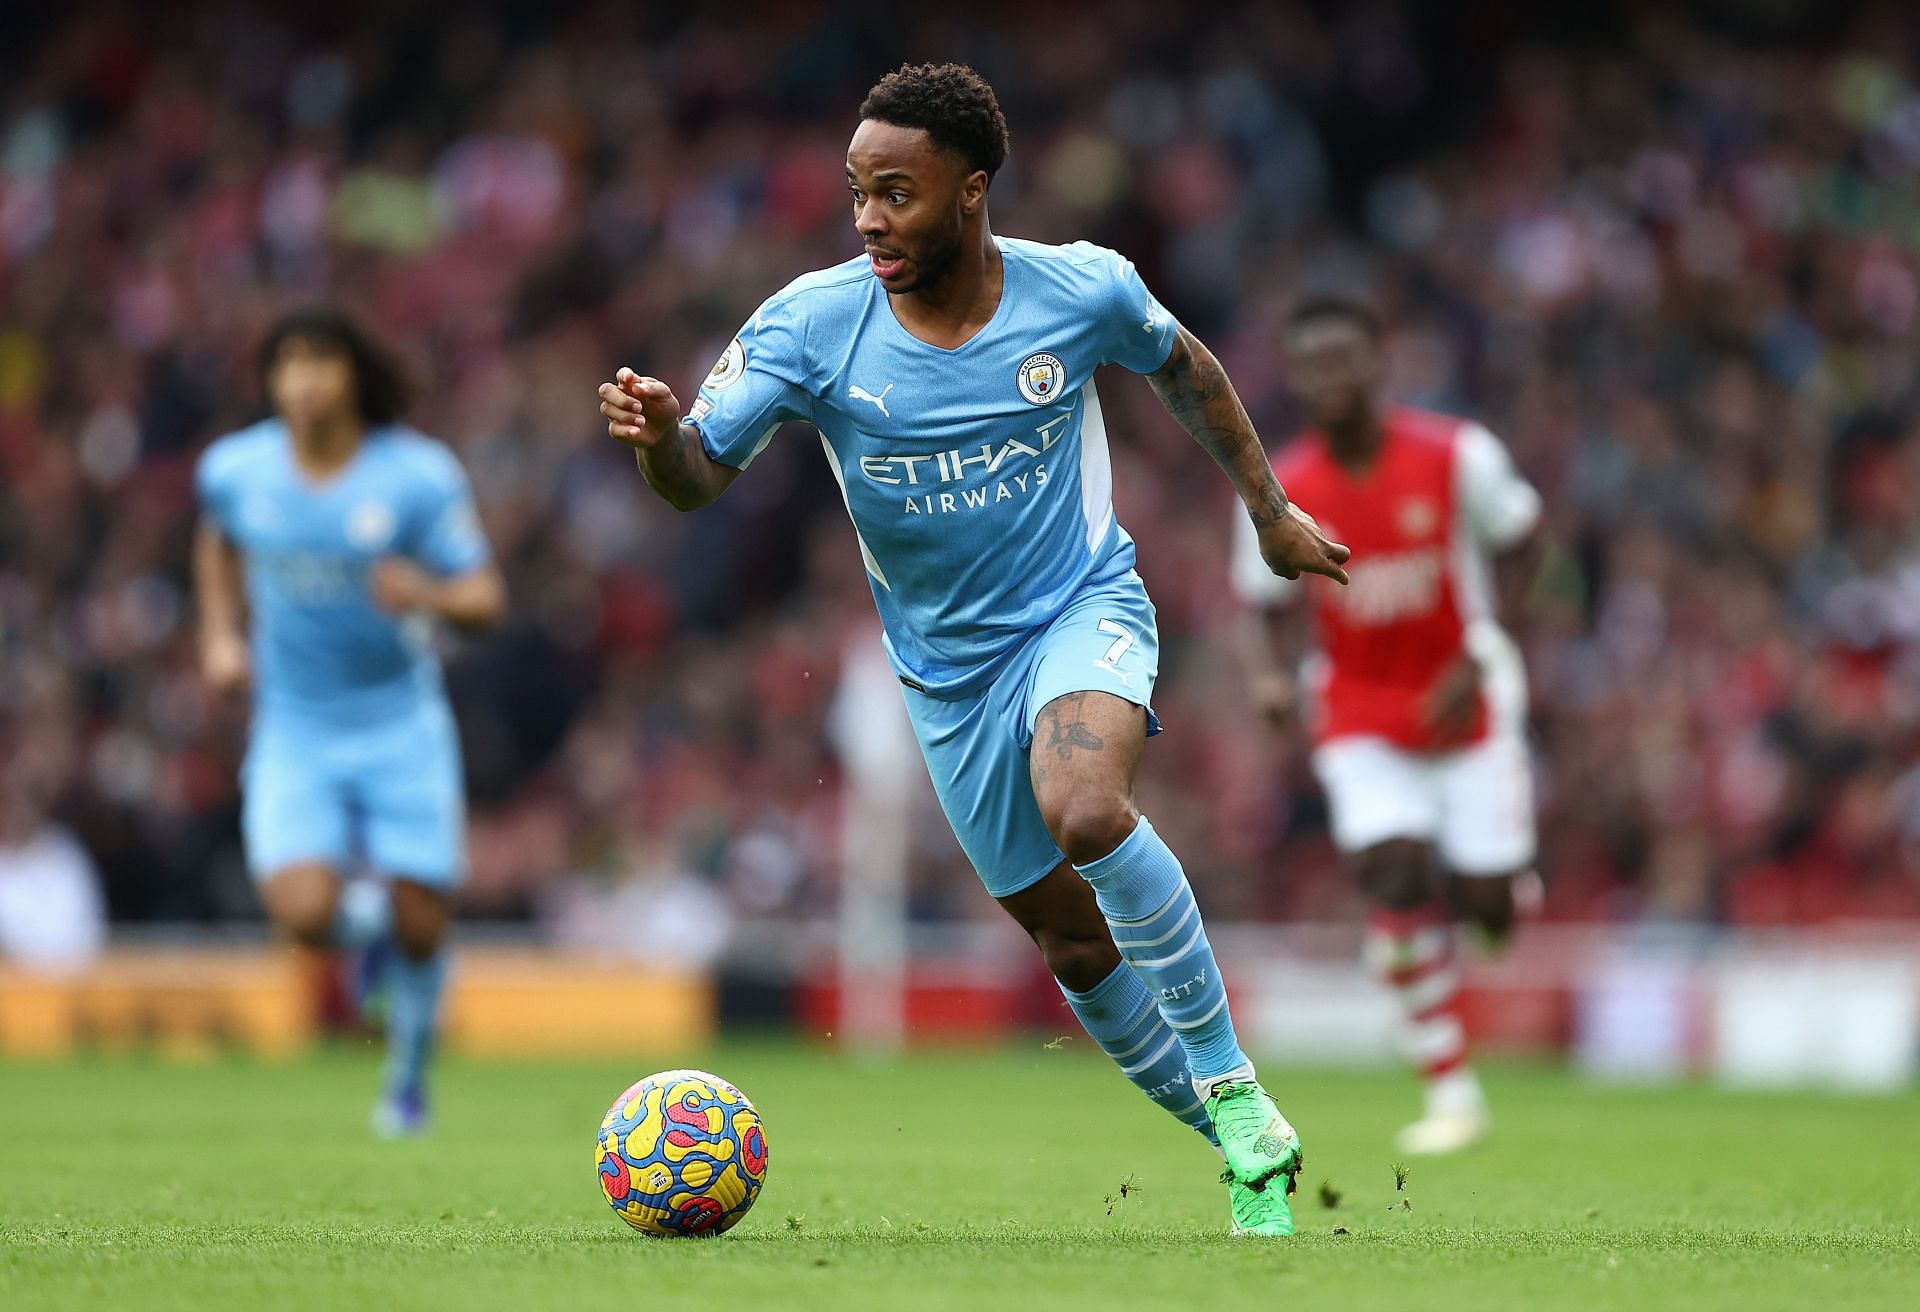 Raheem Sterling continues to be a key player for City.